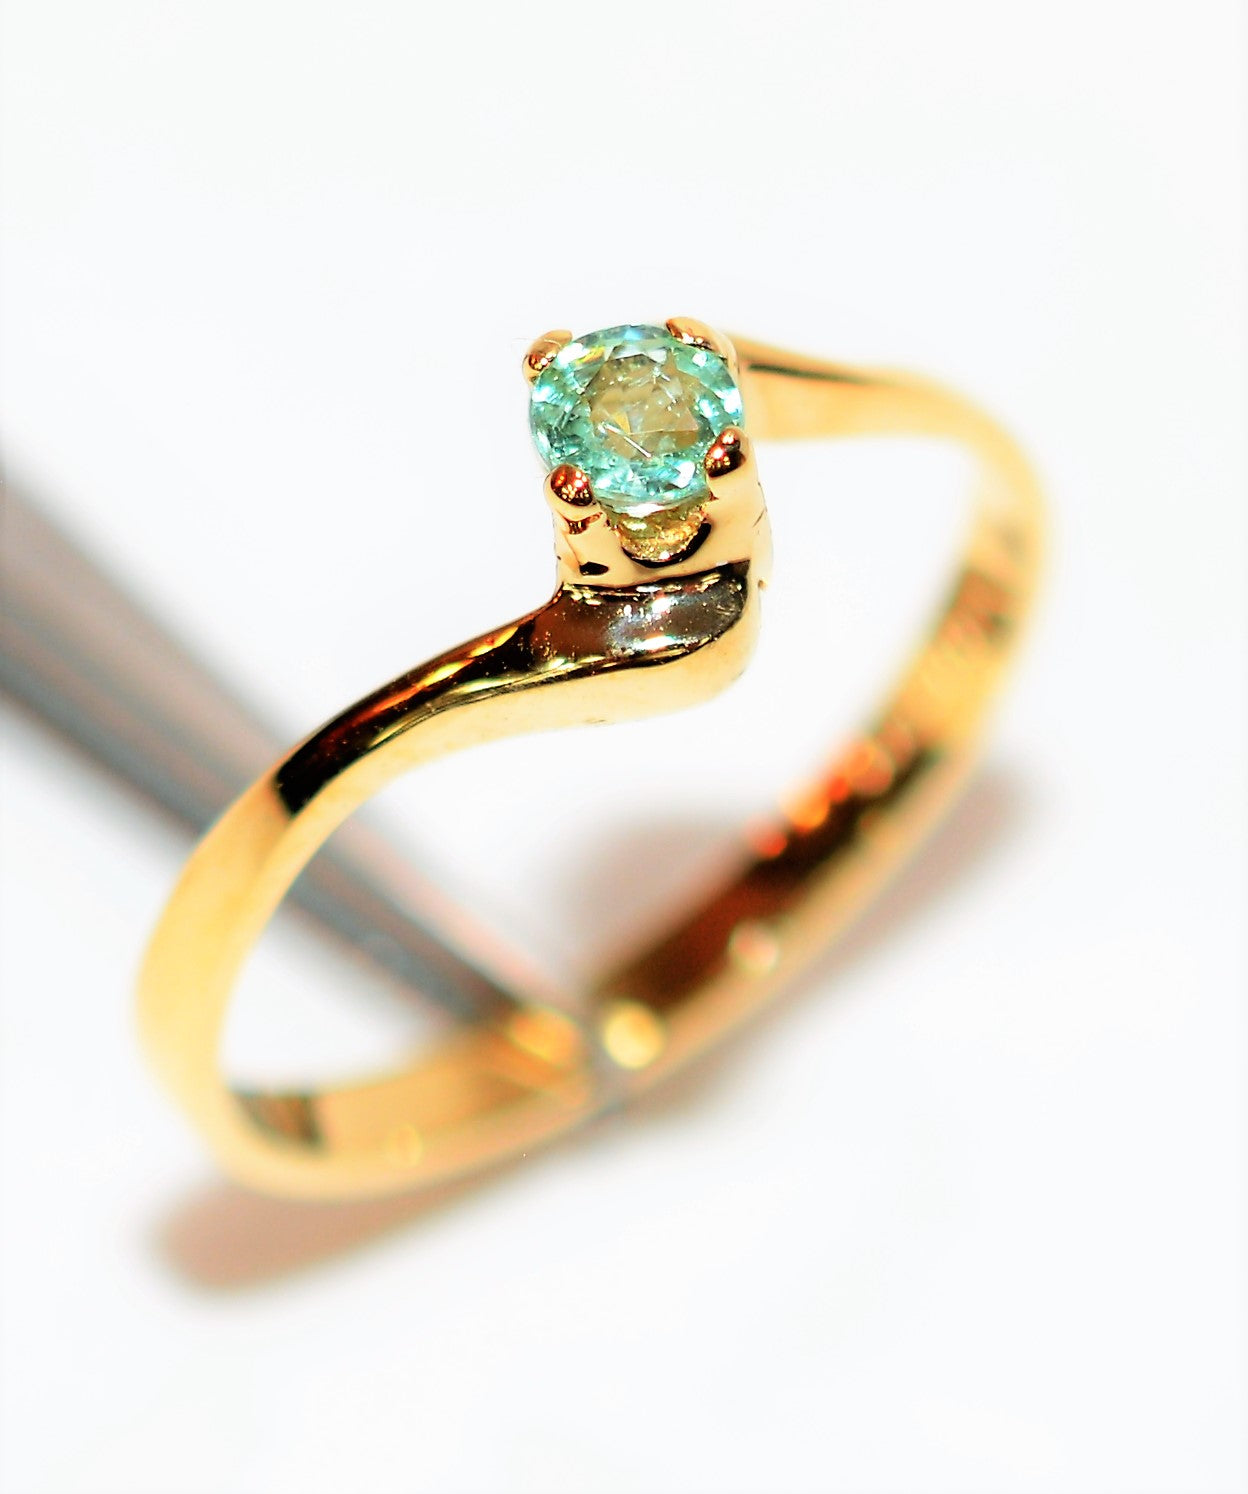 Natural Paraiba Tourmaline Ring 10K Solid Gold .17ct Solitaire Ring Gemstone Ring Women's Ring Birthstone Ring Fine Jewelry Engagement Ring